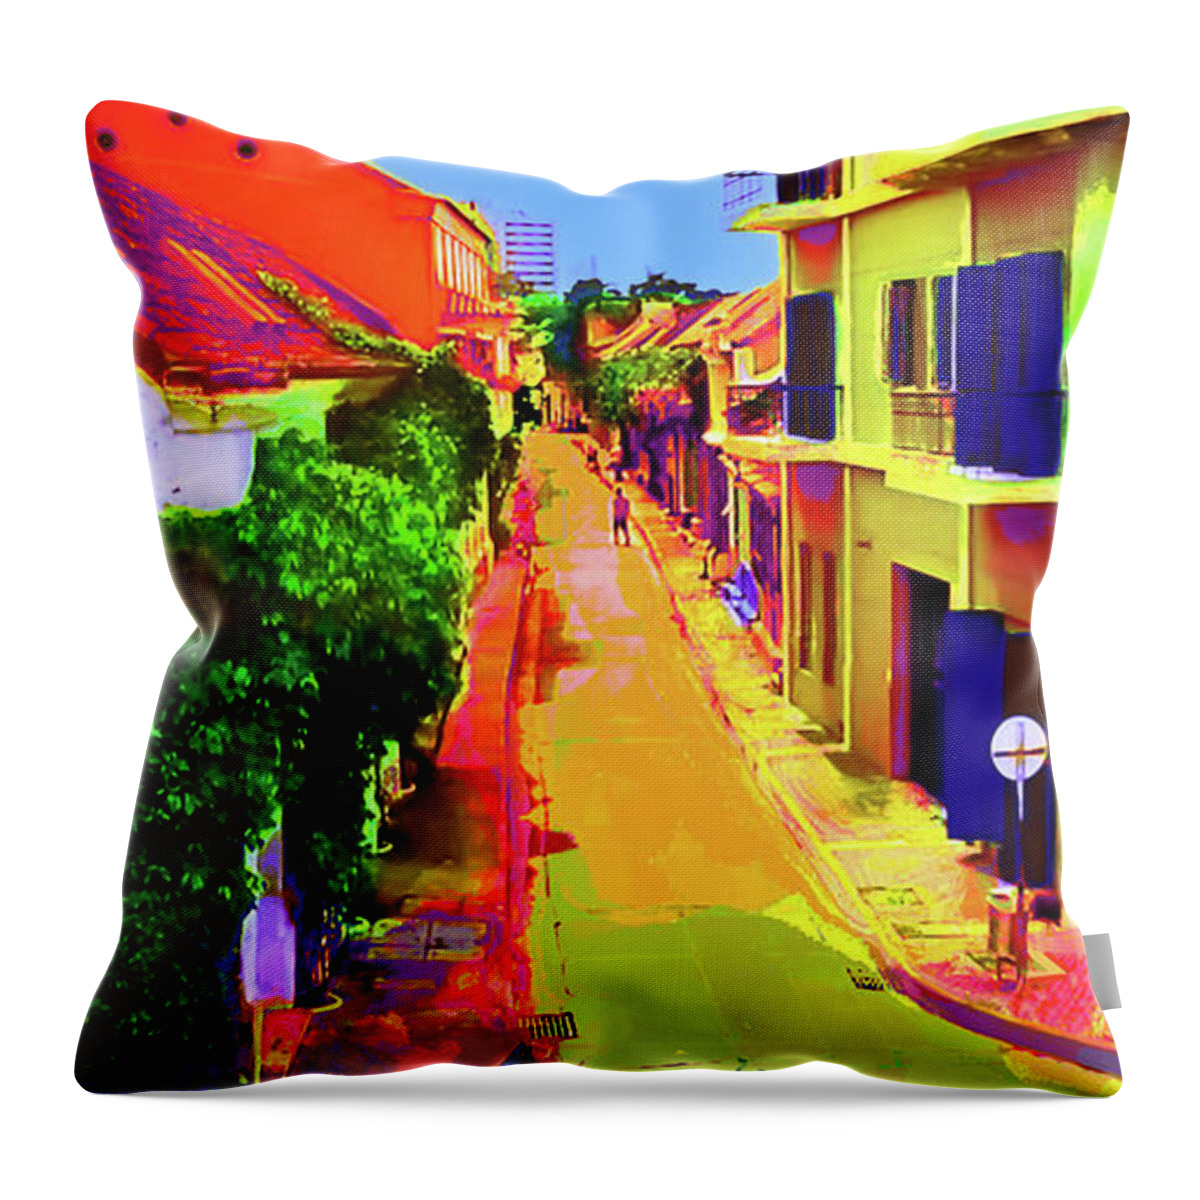 South America Throw Pillow featuring the digital art Cartagena by CHAZ Daugherty